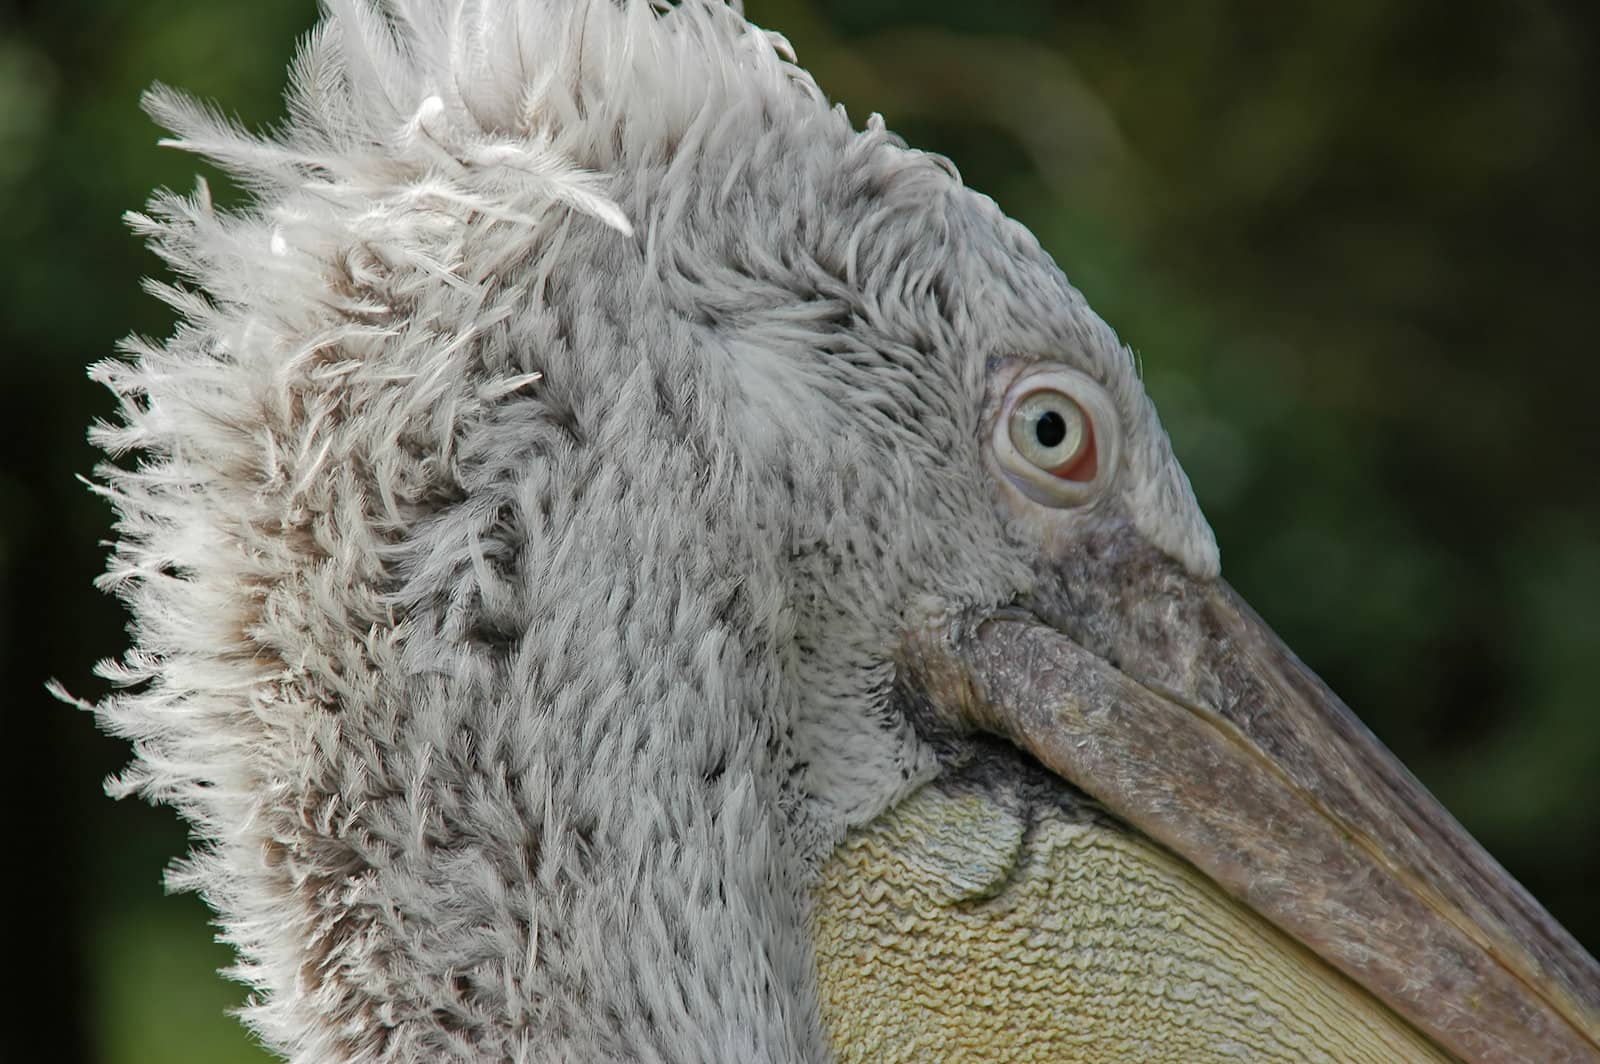 Pelican Close-Up showing detail of eye and bill